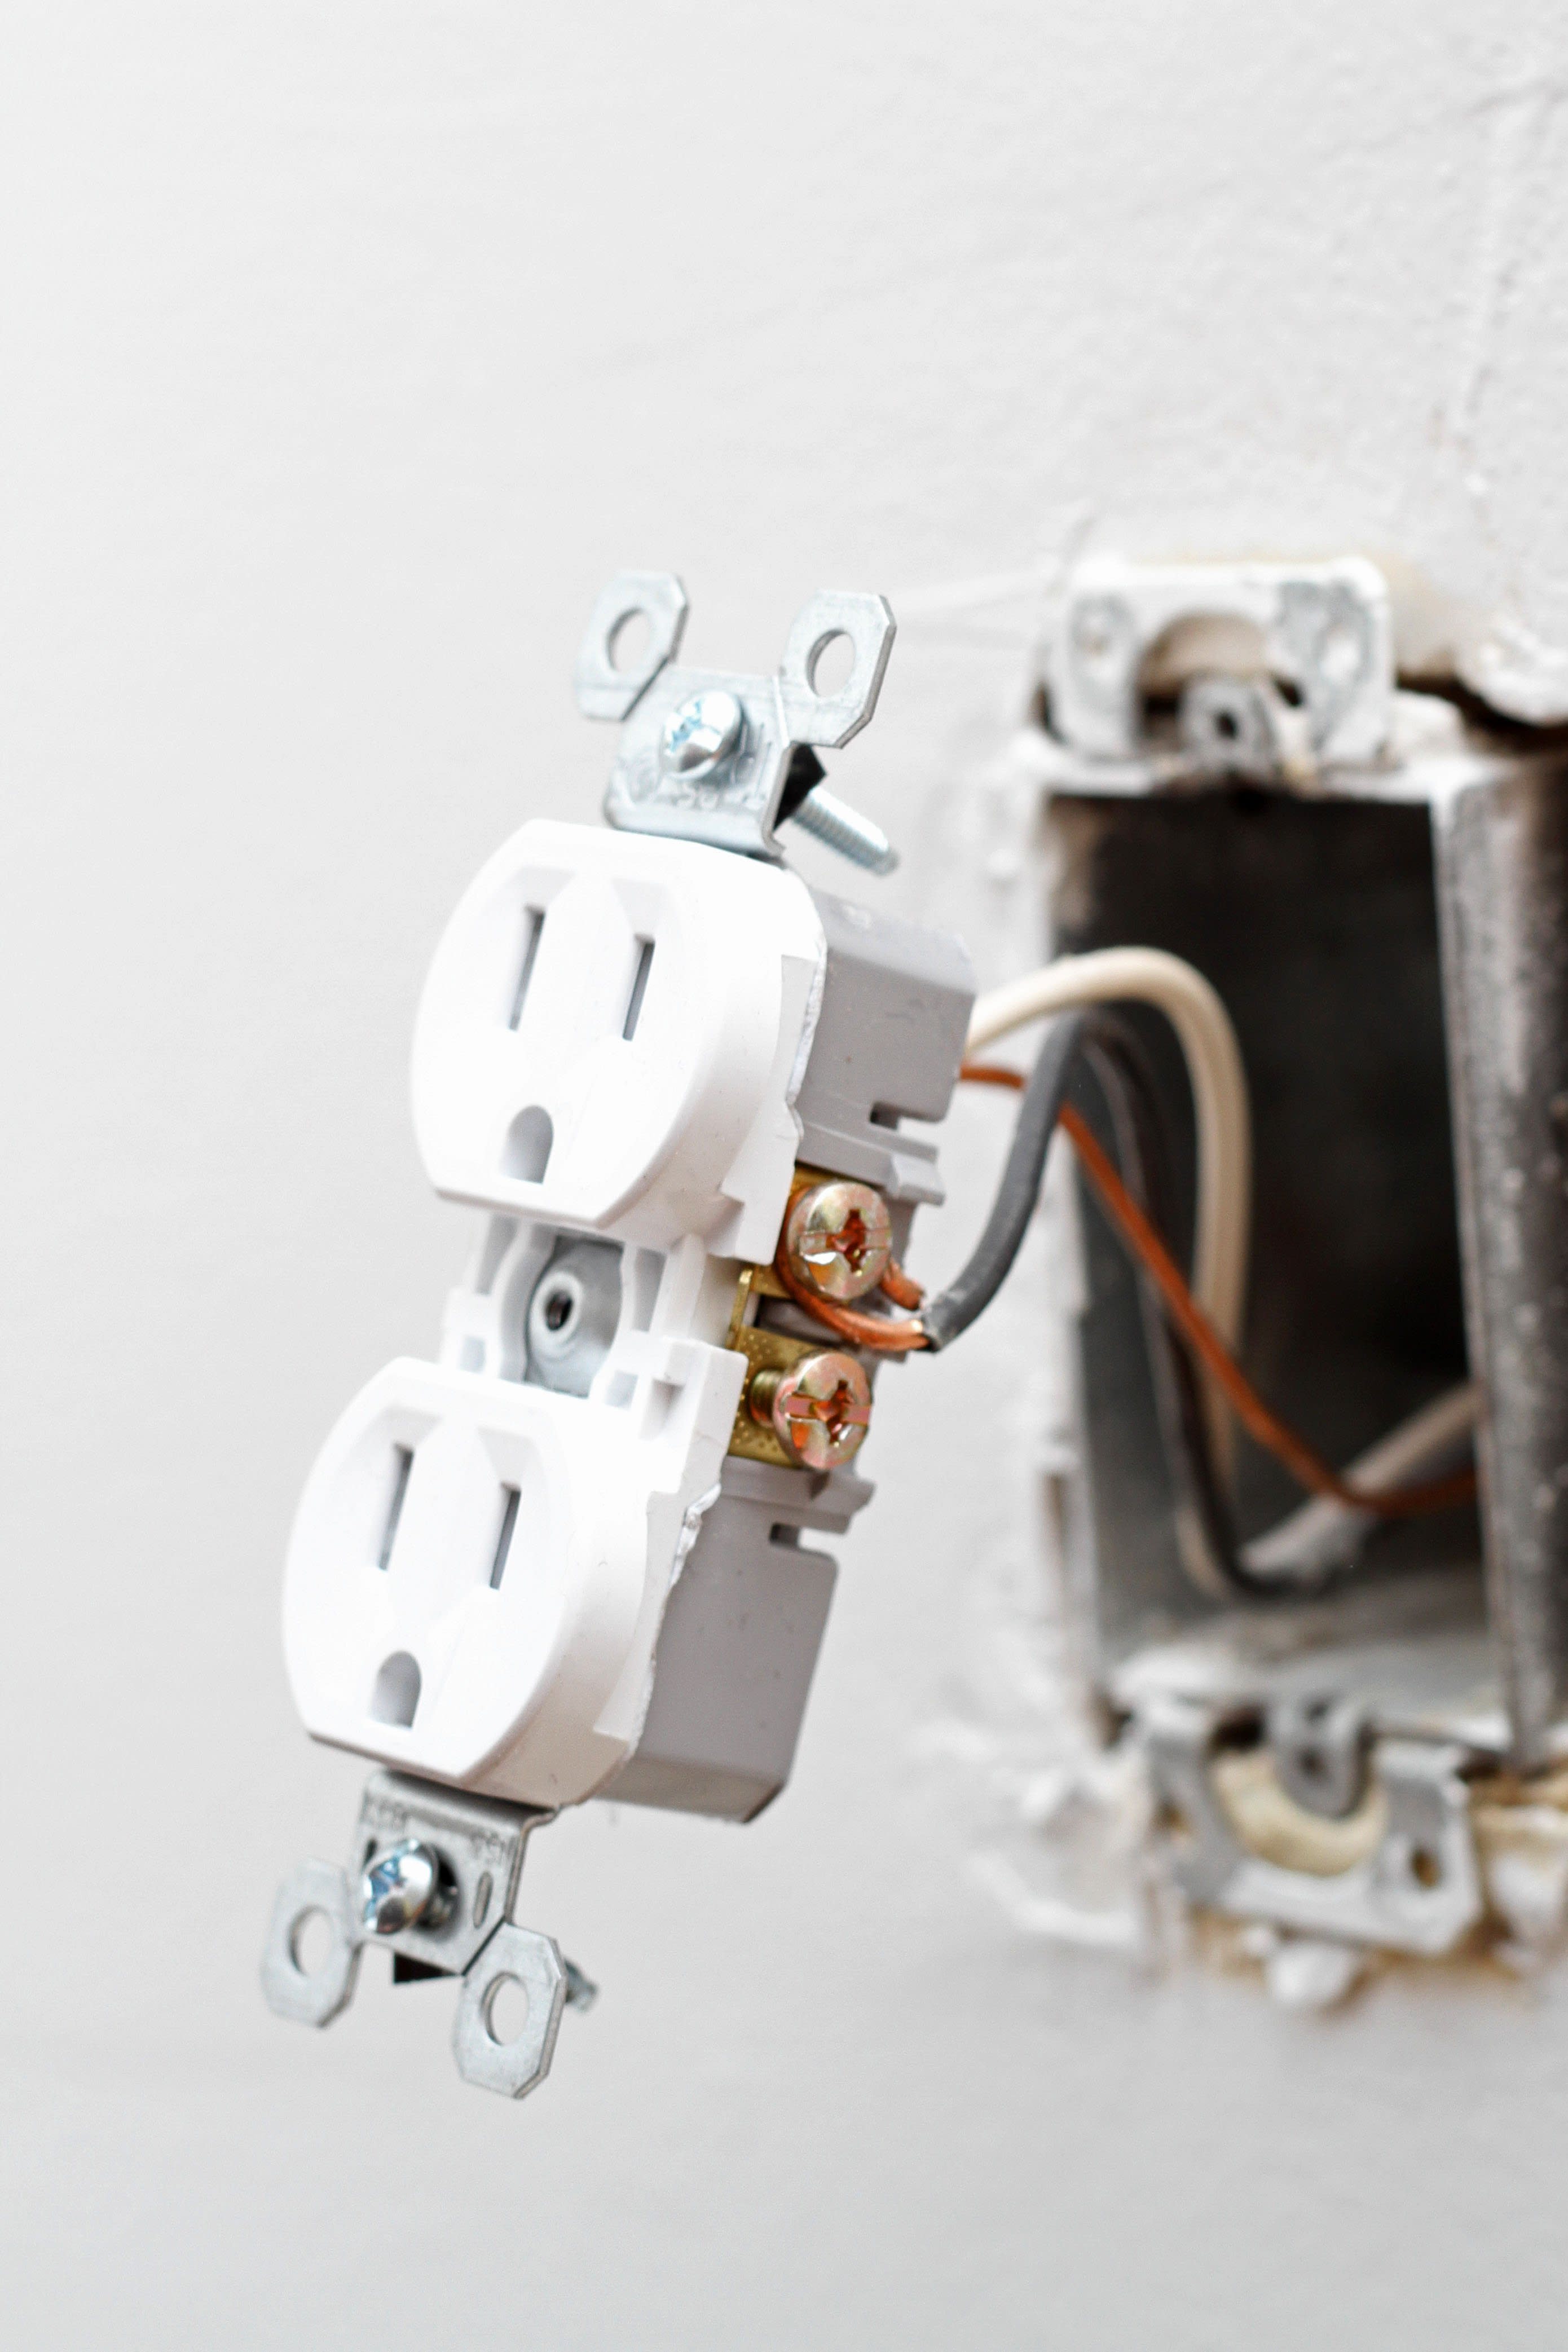 How To Remove An Electrical Outlet How To Replace an Electrical Outlet | Apartment Therapy